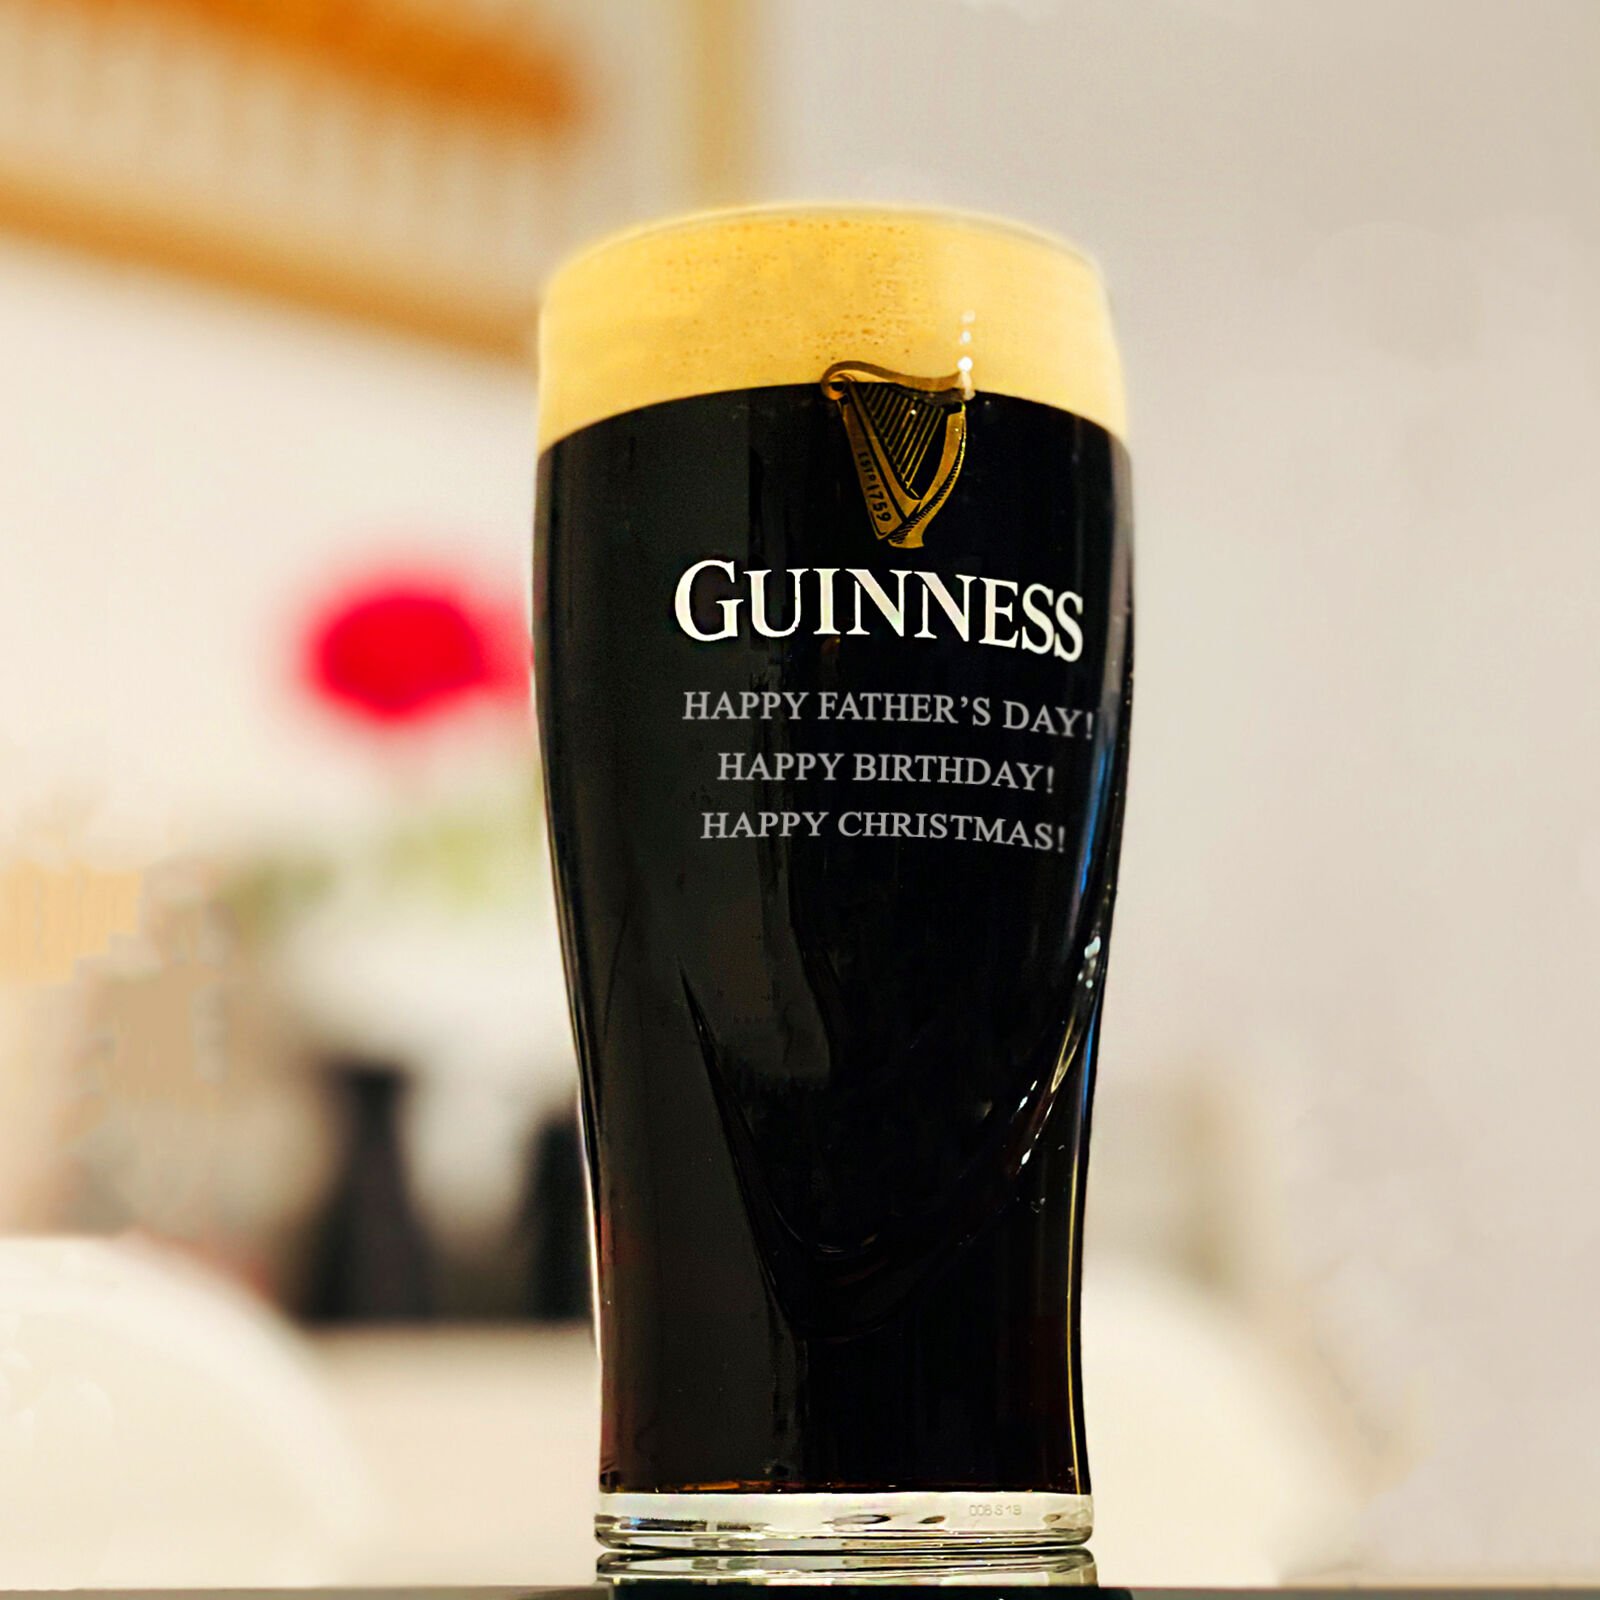 Details about  / Guinness Beer Stout Glass New in Box Embossed Harp Logo